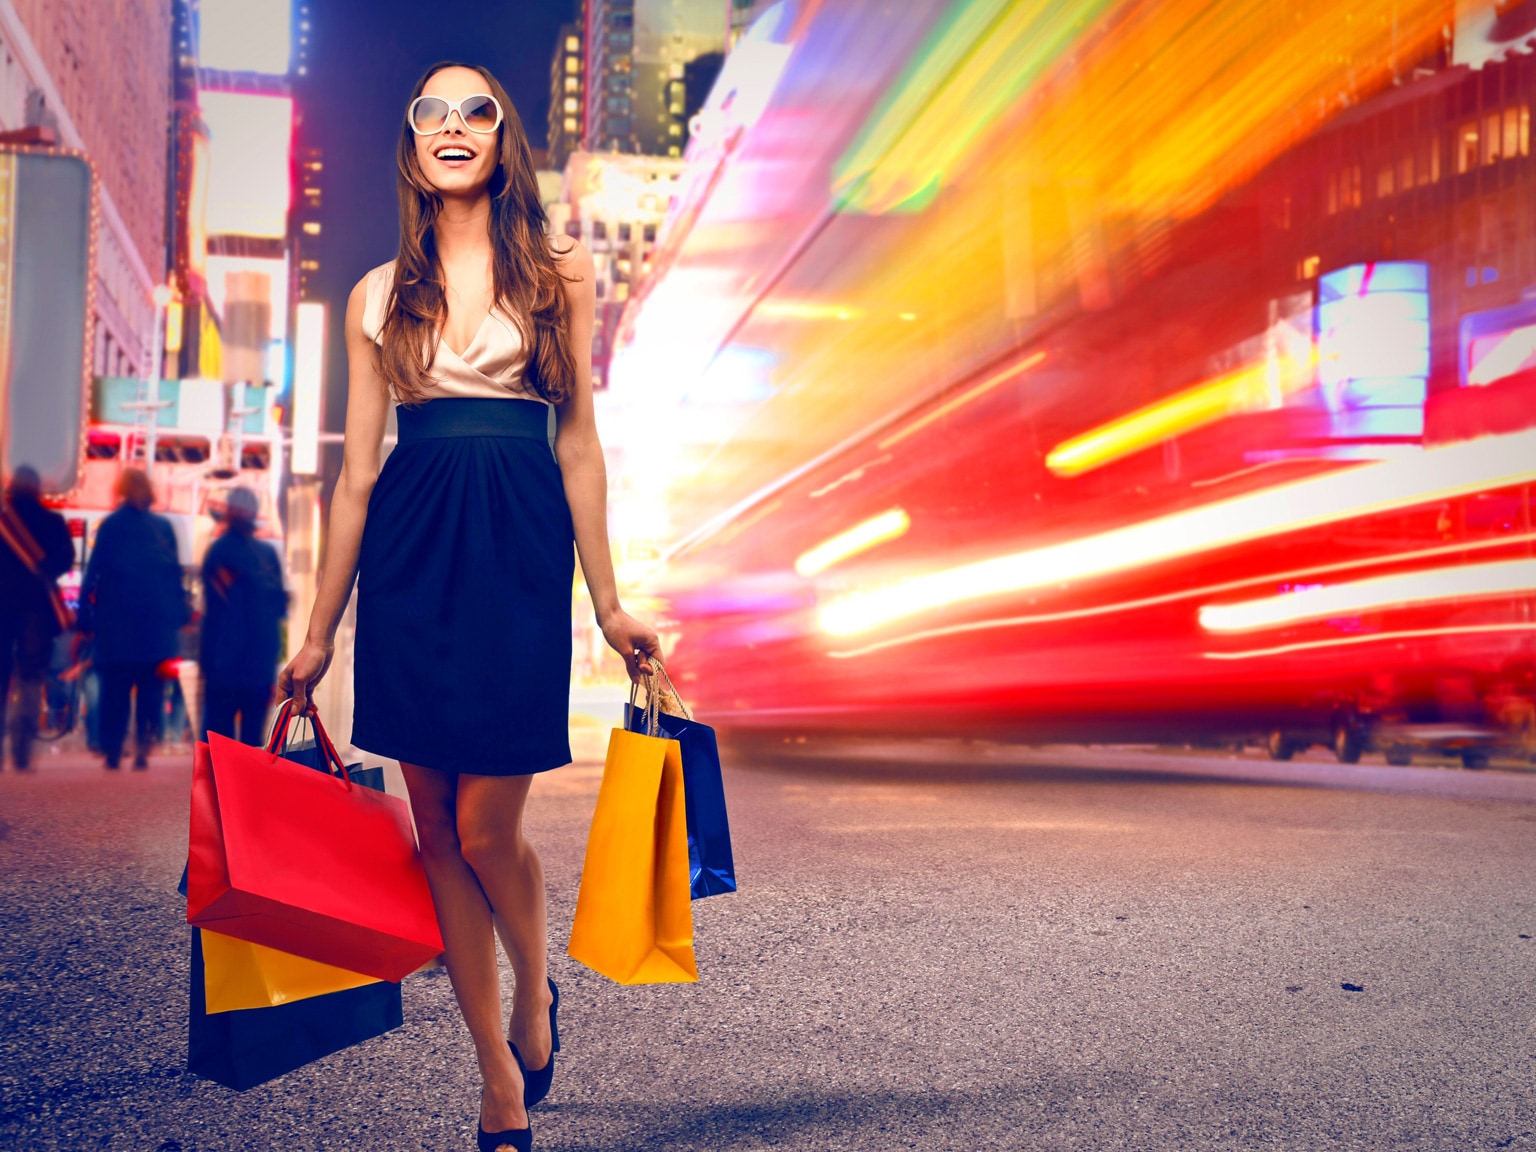 Retail shops hit the road